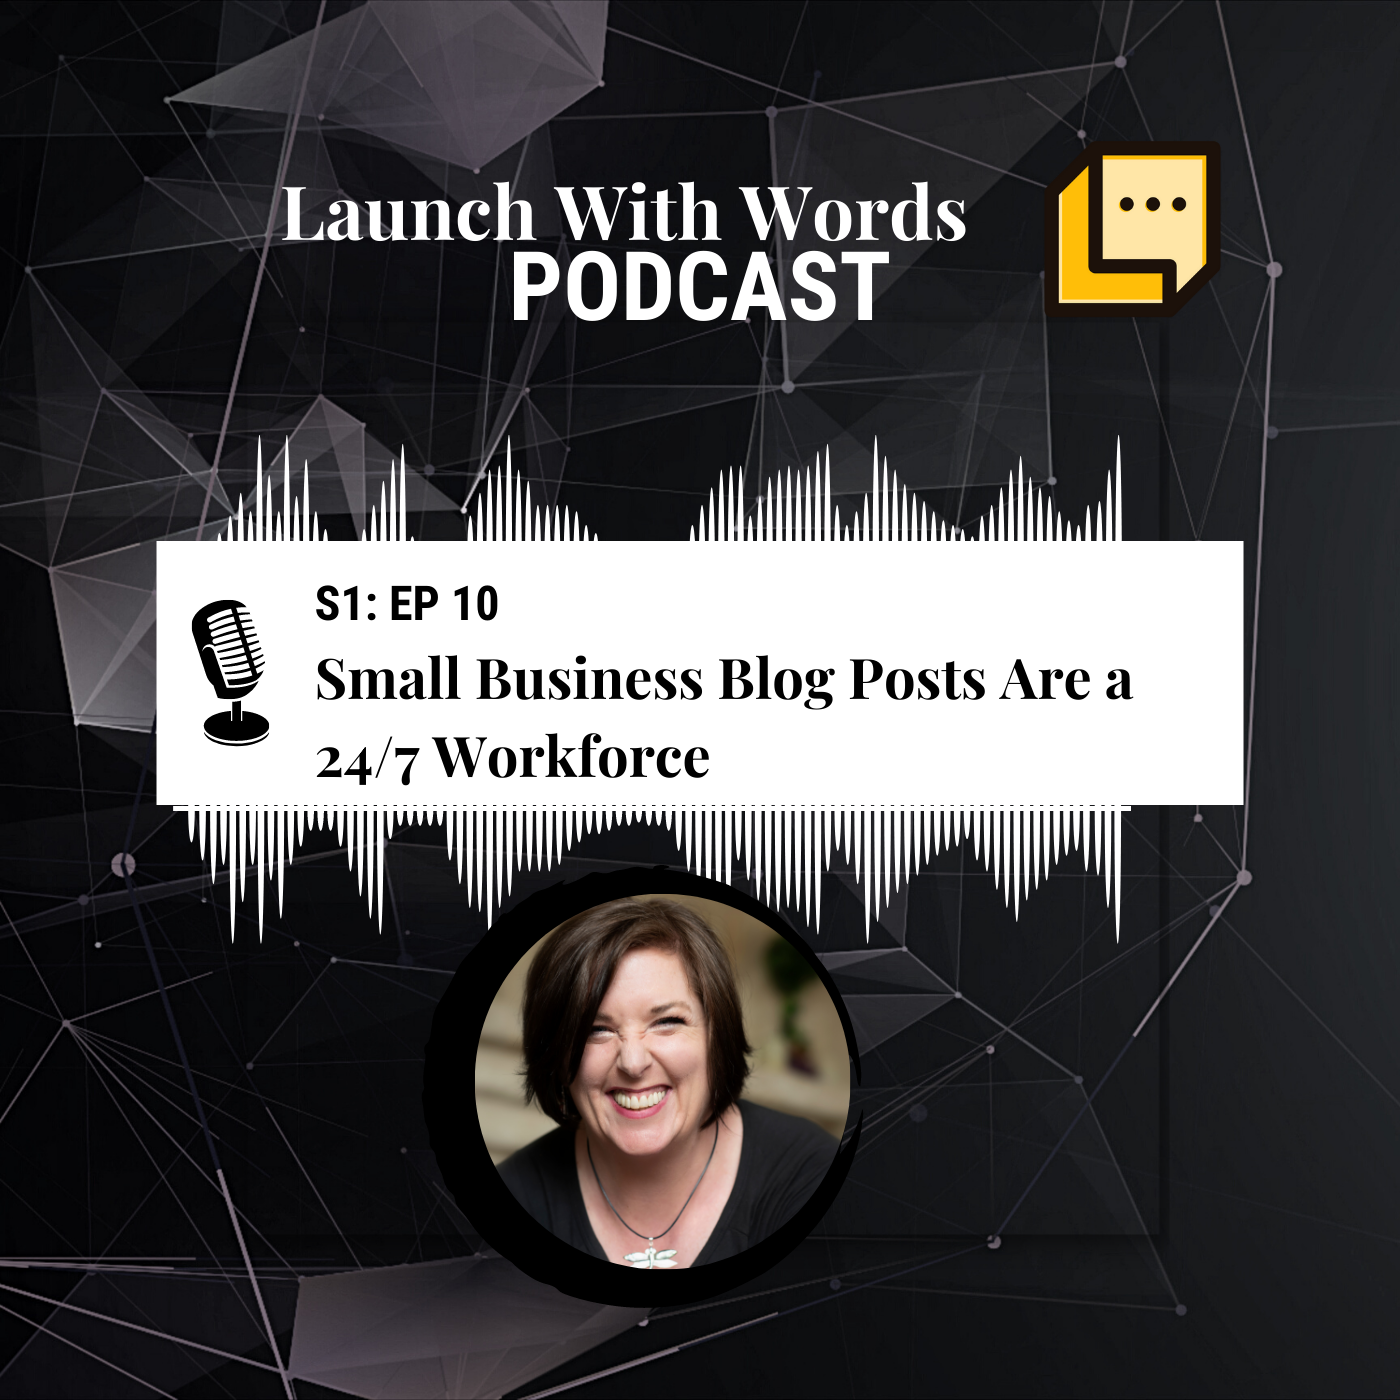 Small Business Blog Posts Are a 24/7 Workforce